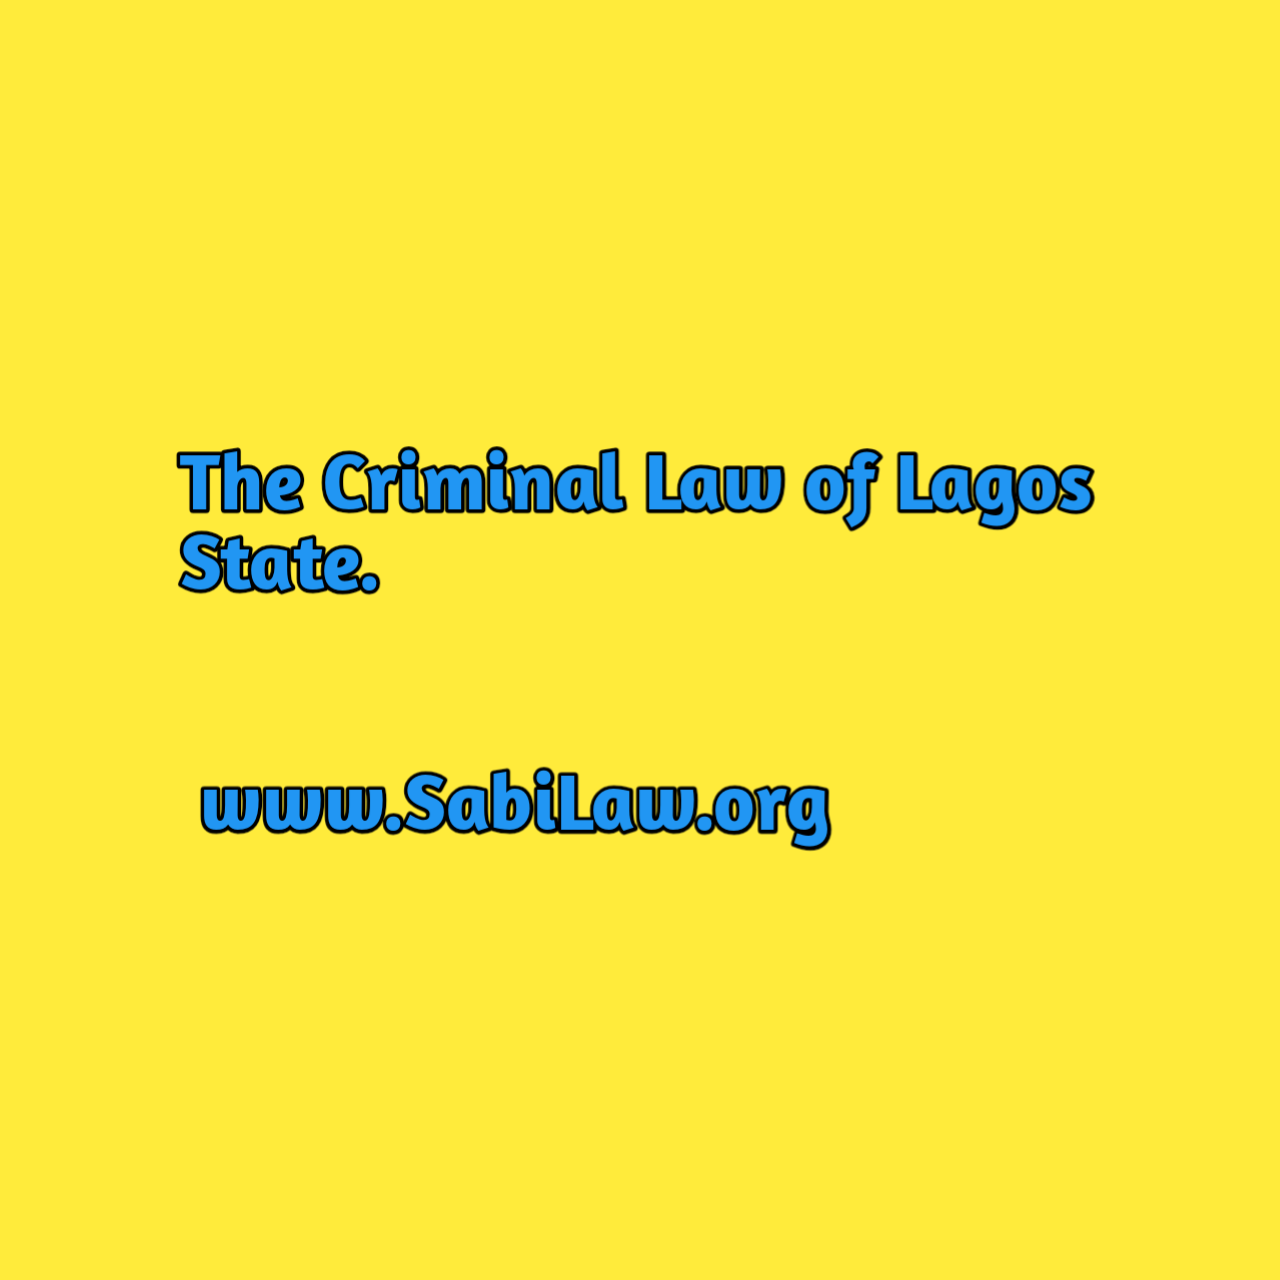 The Criminal Law of Lagos State